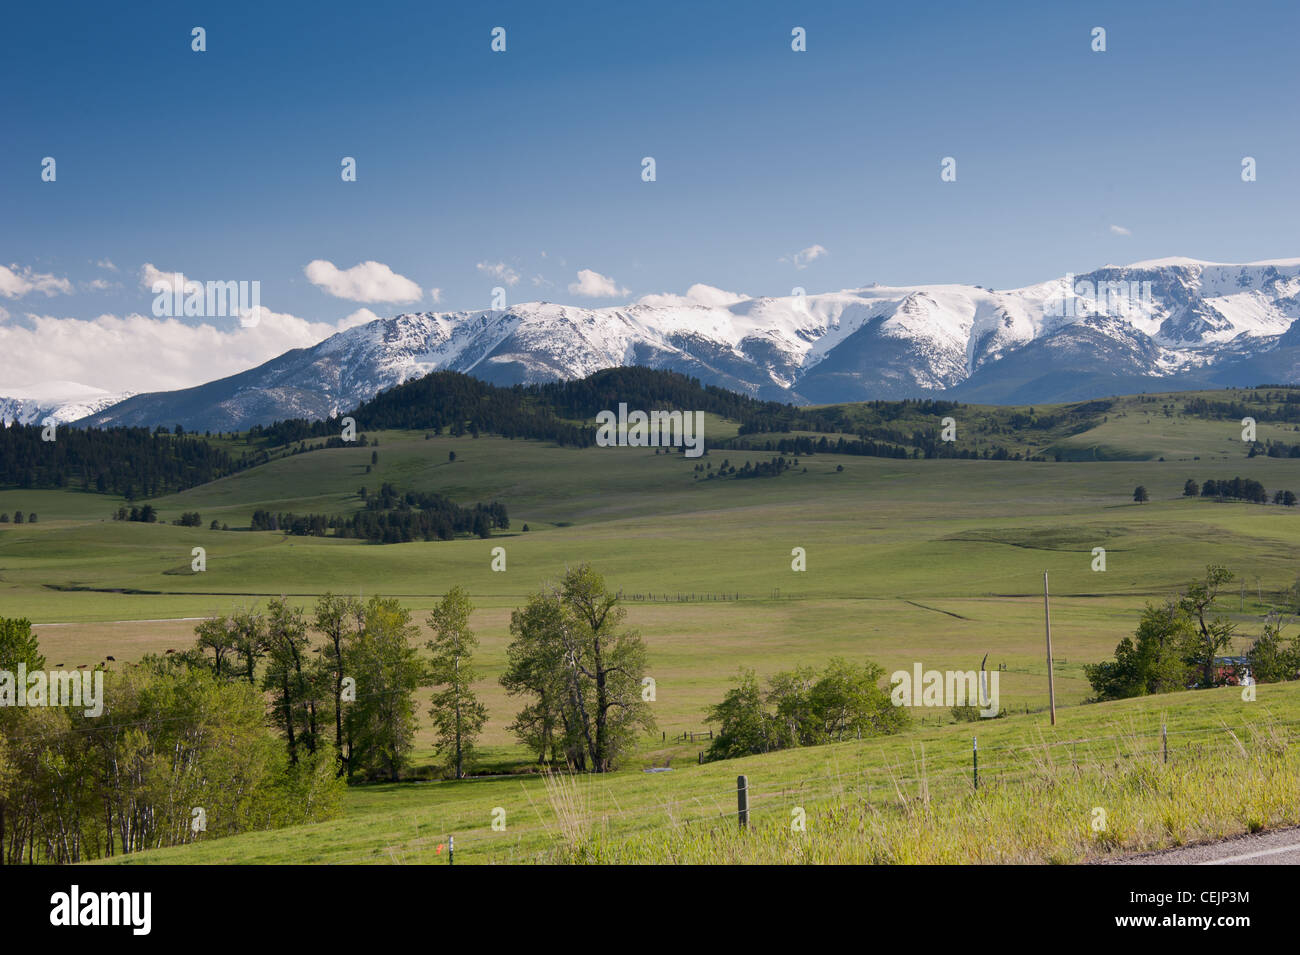 Montana’s Beartooth Mountains are seen in the distance from the Stillwater River valley. Stock Photo